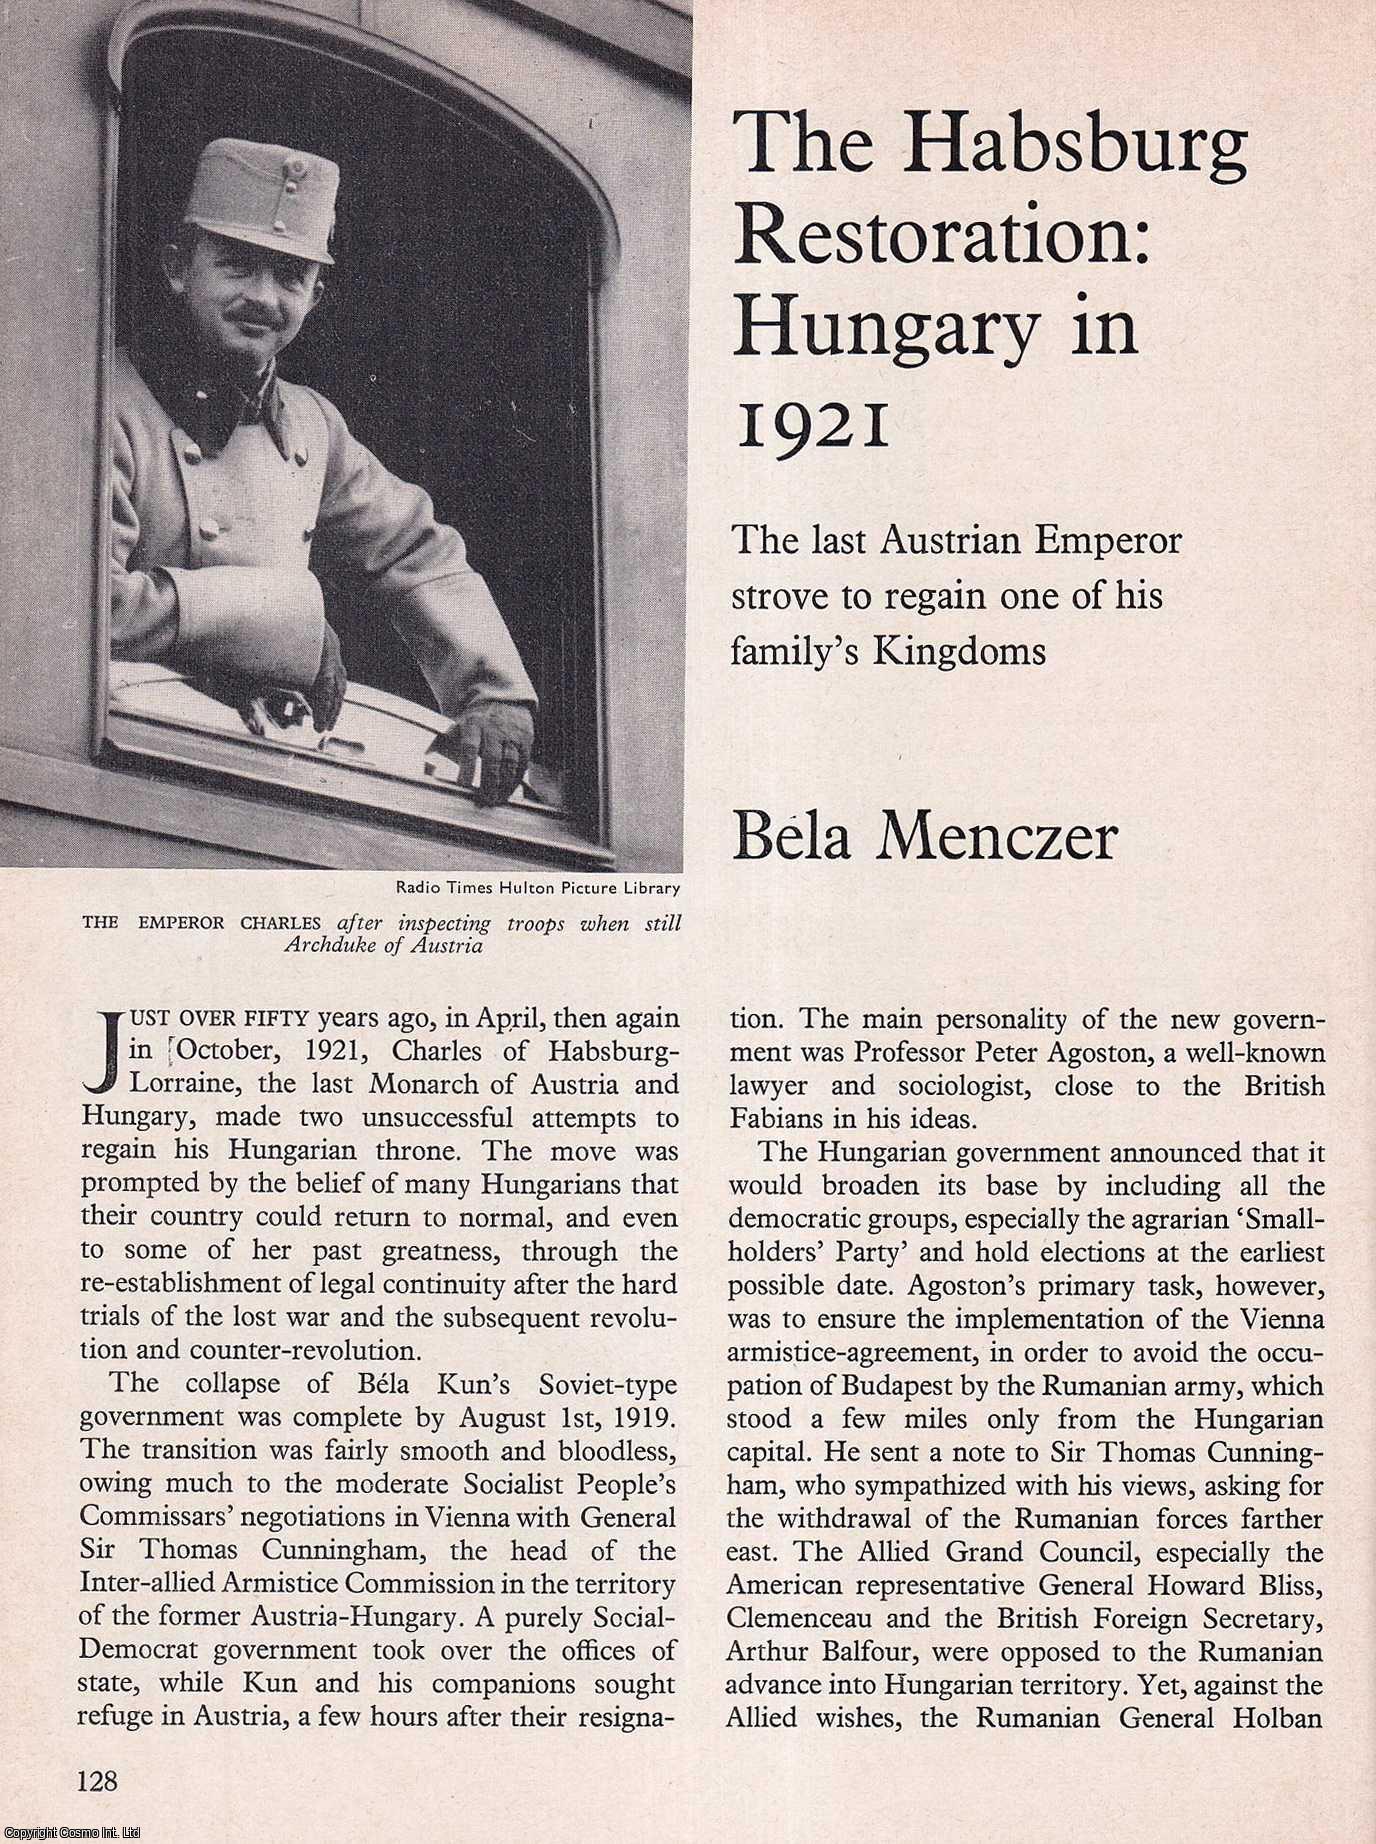 Bela Menczer - The Habsburg Restoration: Hungary in 1921: The Last Austrian Emperor Strove to Regain one of his Family's Kingdoms. An original article from History Today magazine, 1972.